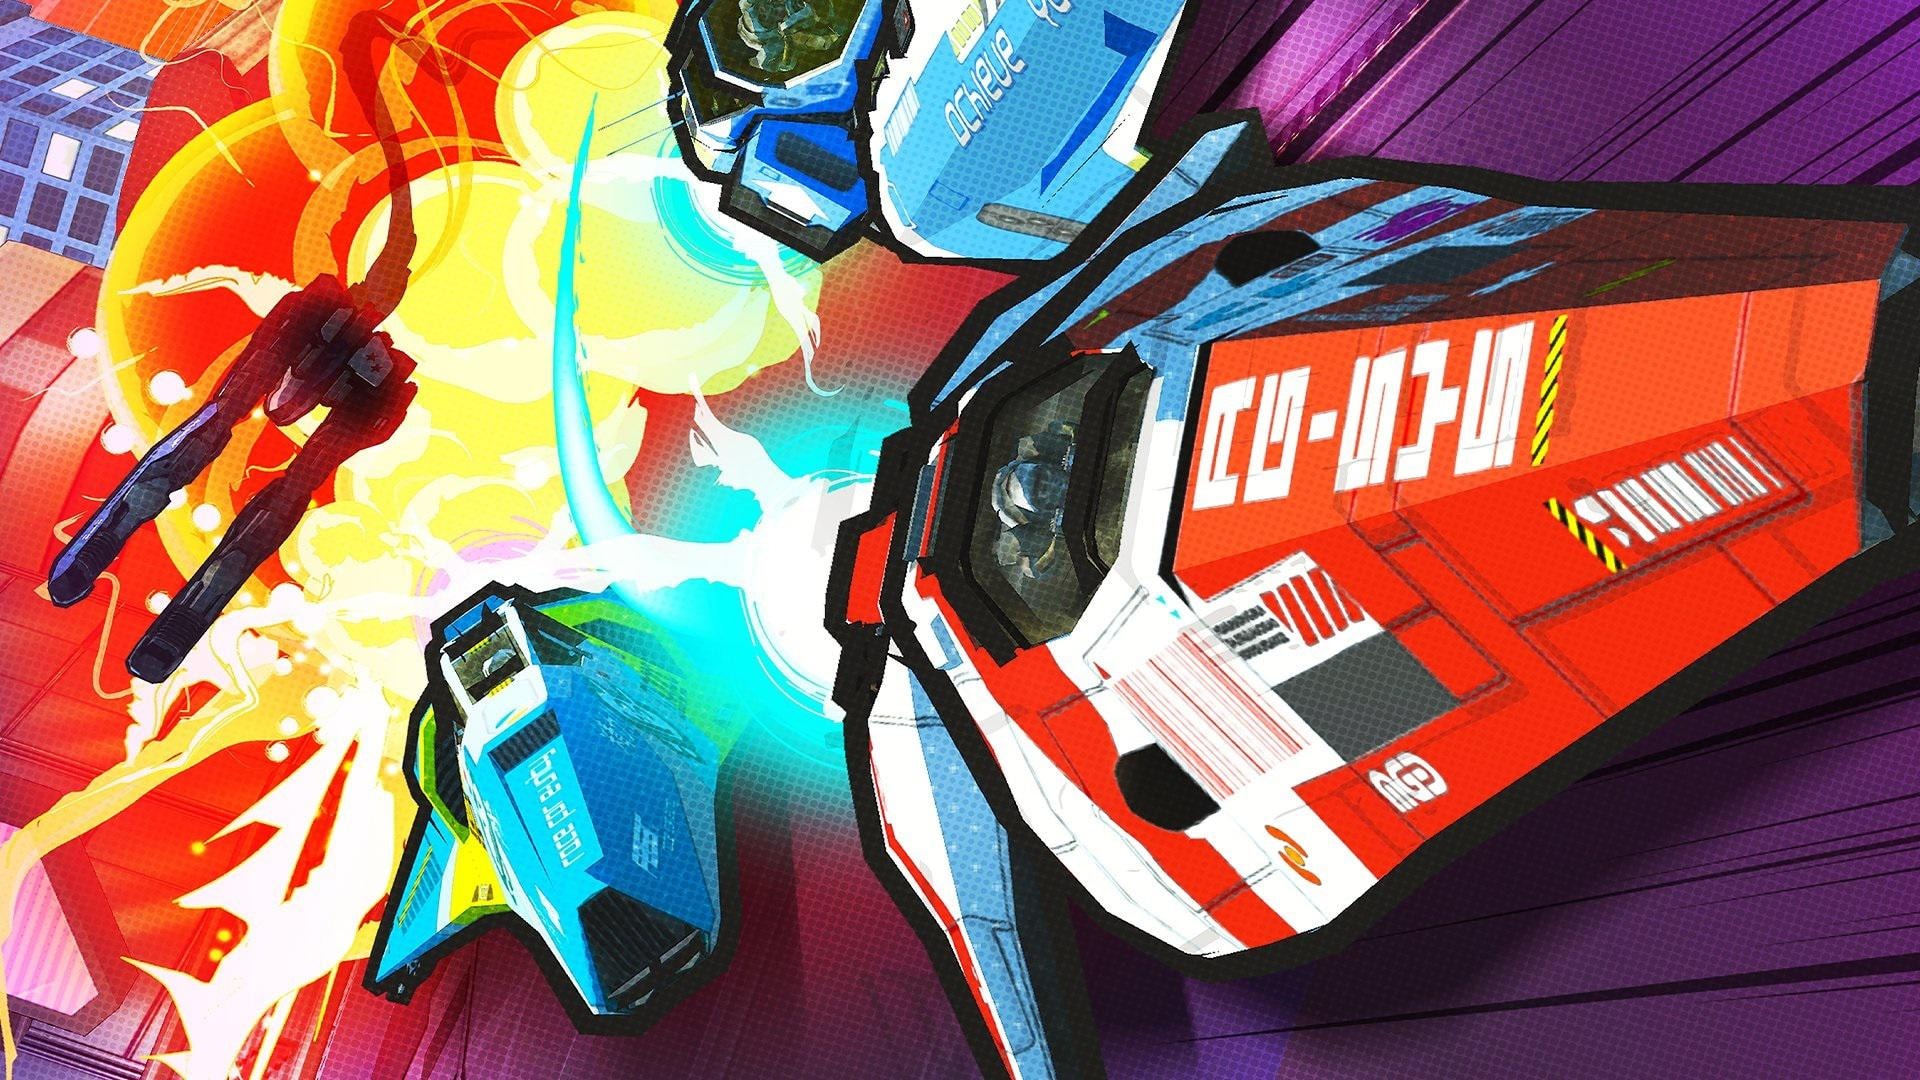 sonys-wipeout-is-coming-back-but-as-a-card-based-mobile-racer